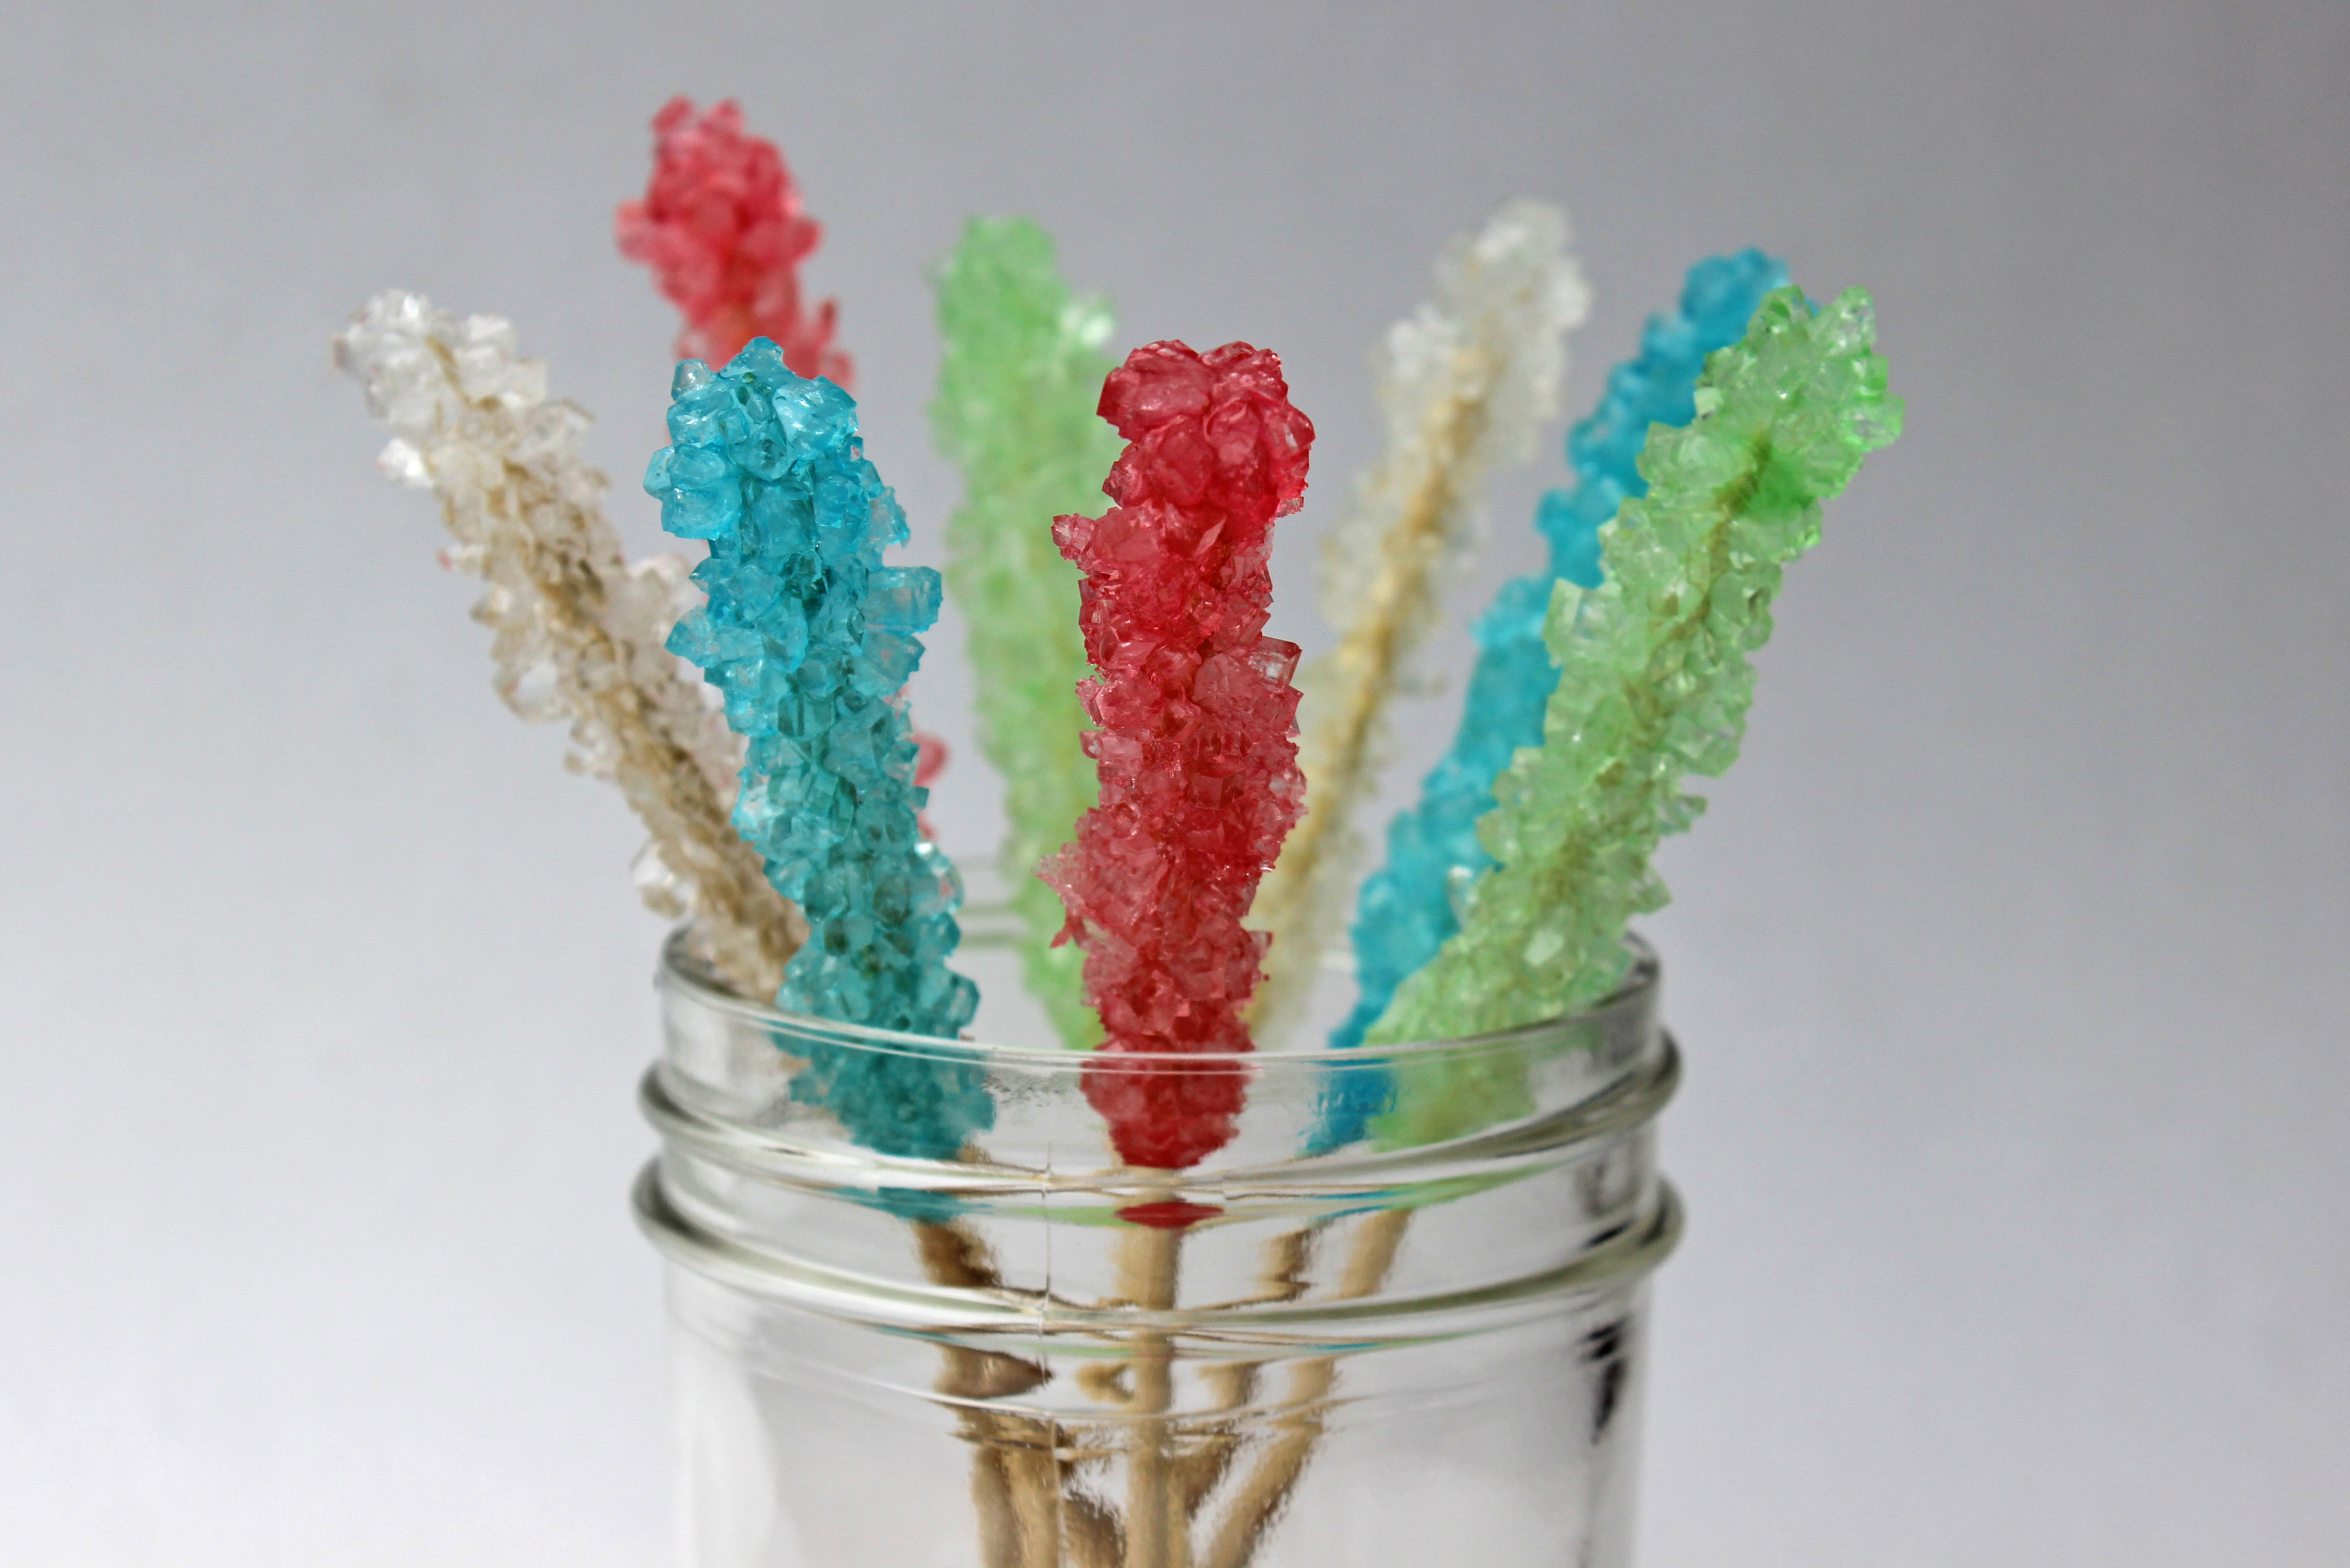 making rock candy science project